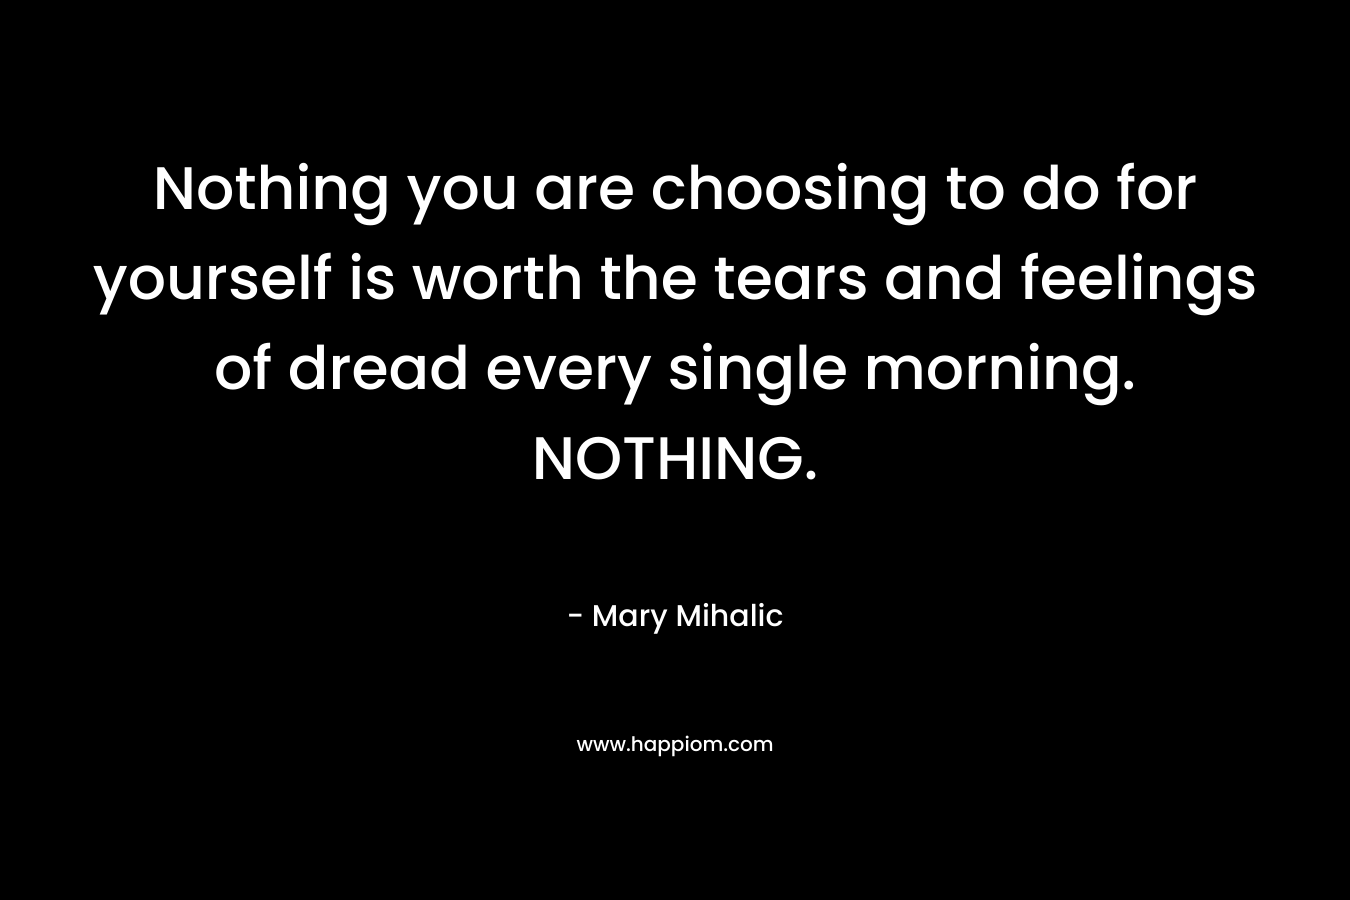 Nothing you are choosing to do for yourself is worth the tears and feelings of dread every single morning. NOTHING. – Mary Mihalic